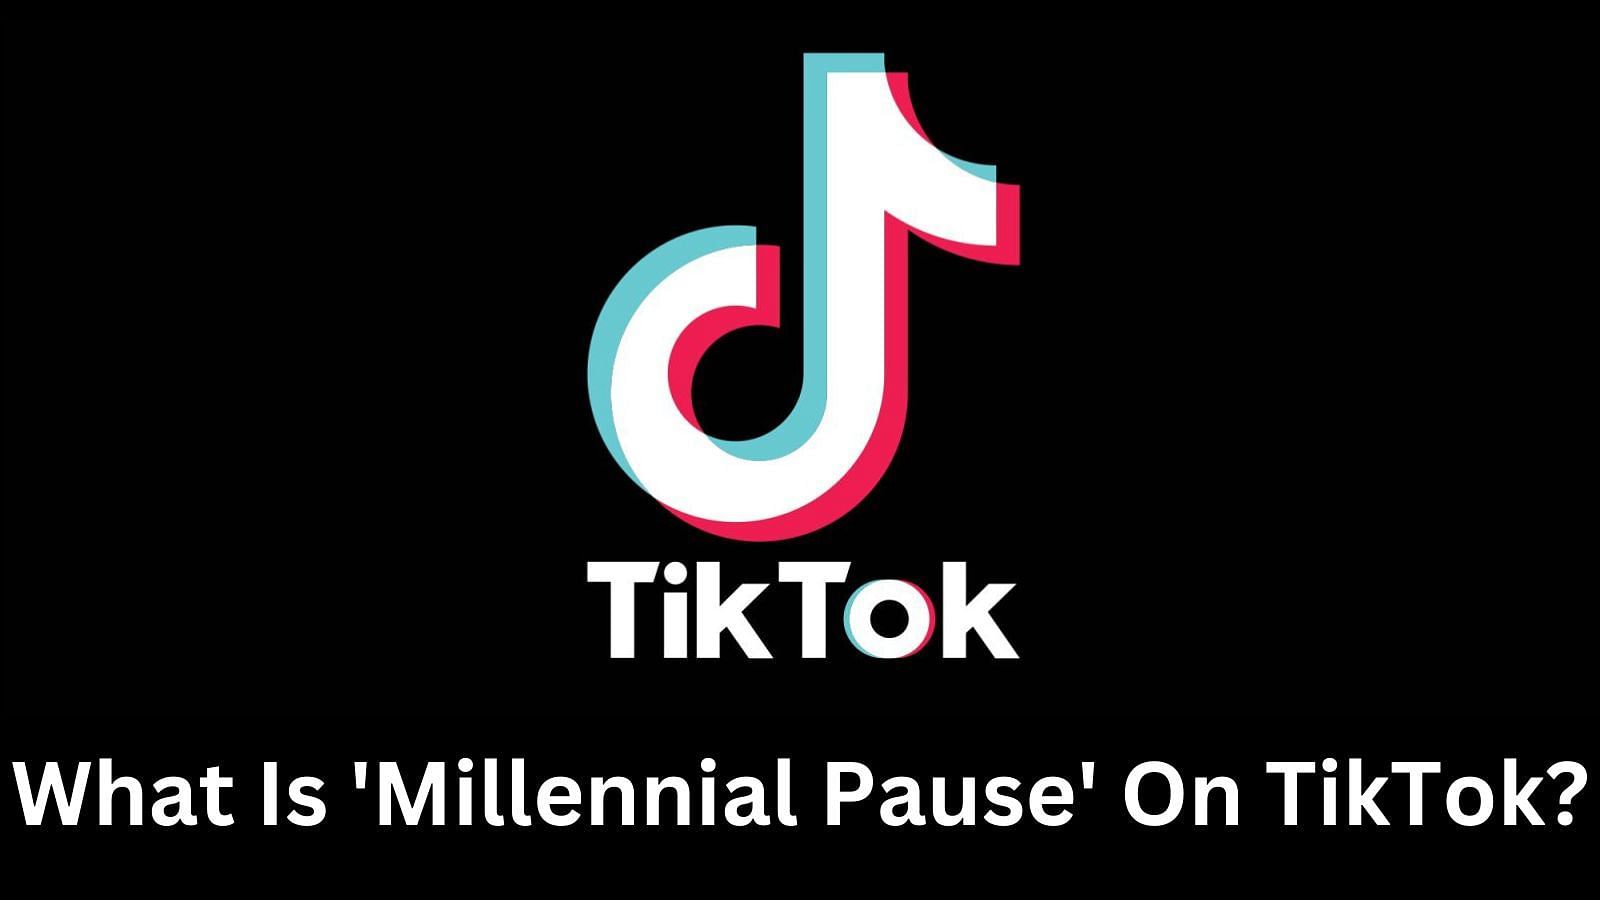 &quot;Millennial pause&rdquo; is a phenomenon where millennials pause for a second before speaking when a video begins. (Image via Sportskeeda)